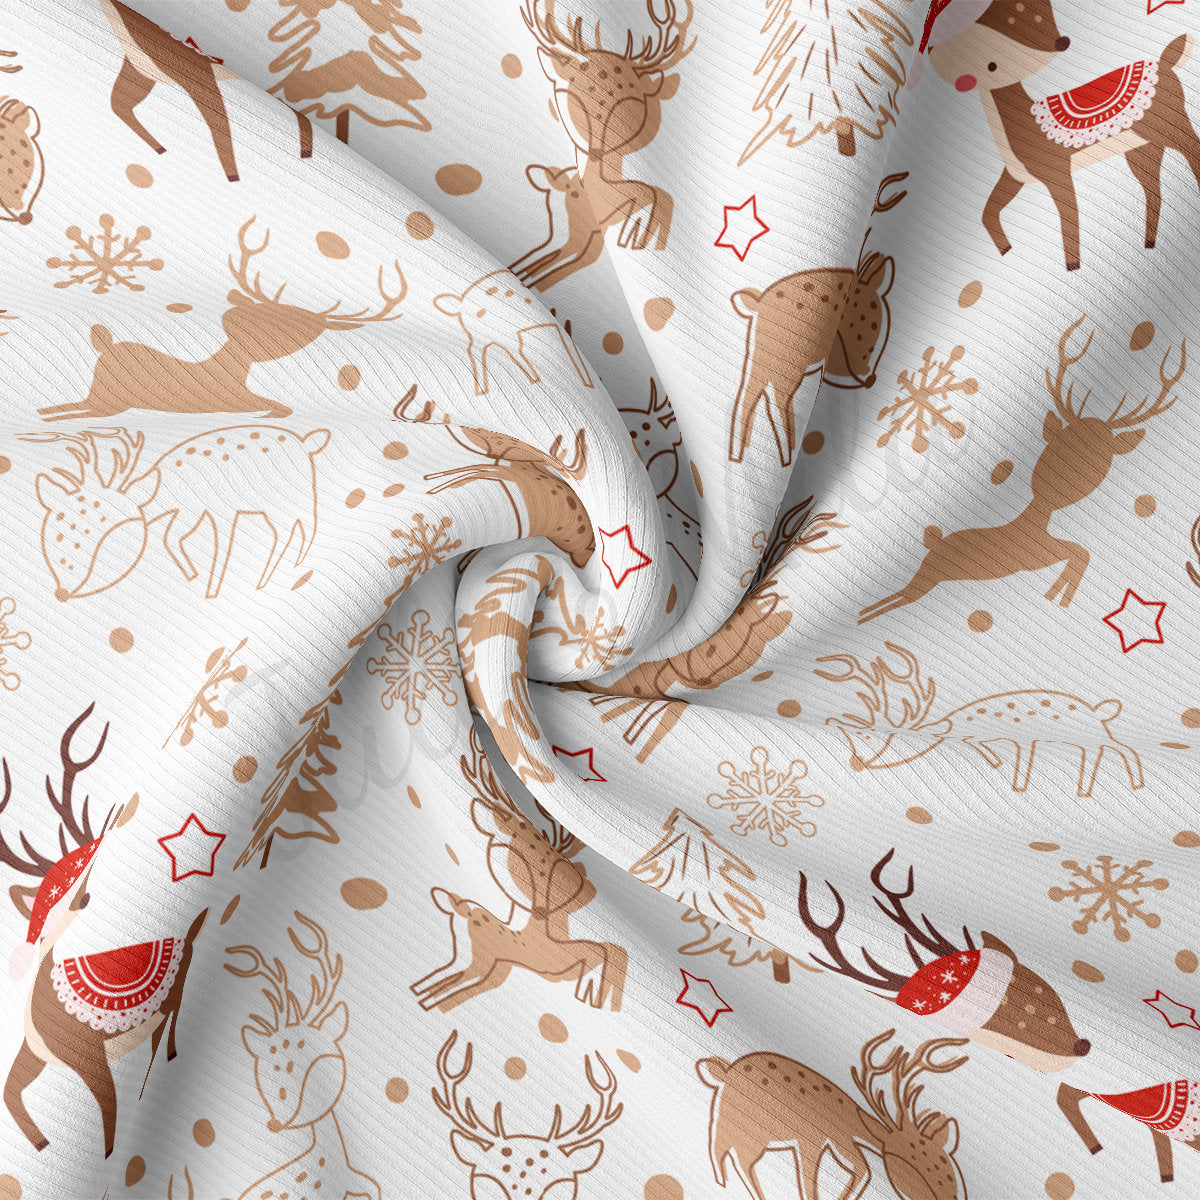 Christmas Rib Knit Fabric by the Yard Ribbed Jersey Stretchy Soft Polyester Stretch Fabric 1 Yard  RBK2165